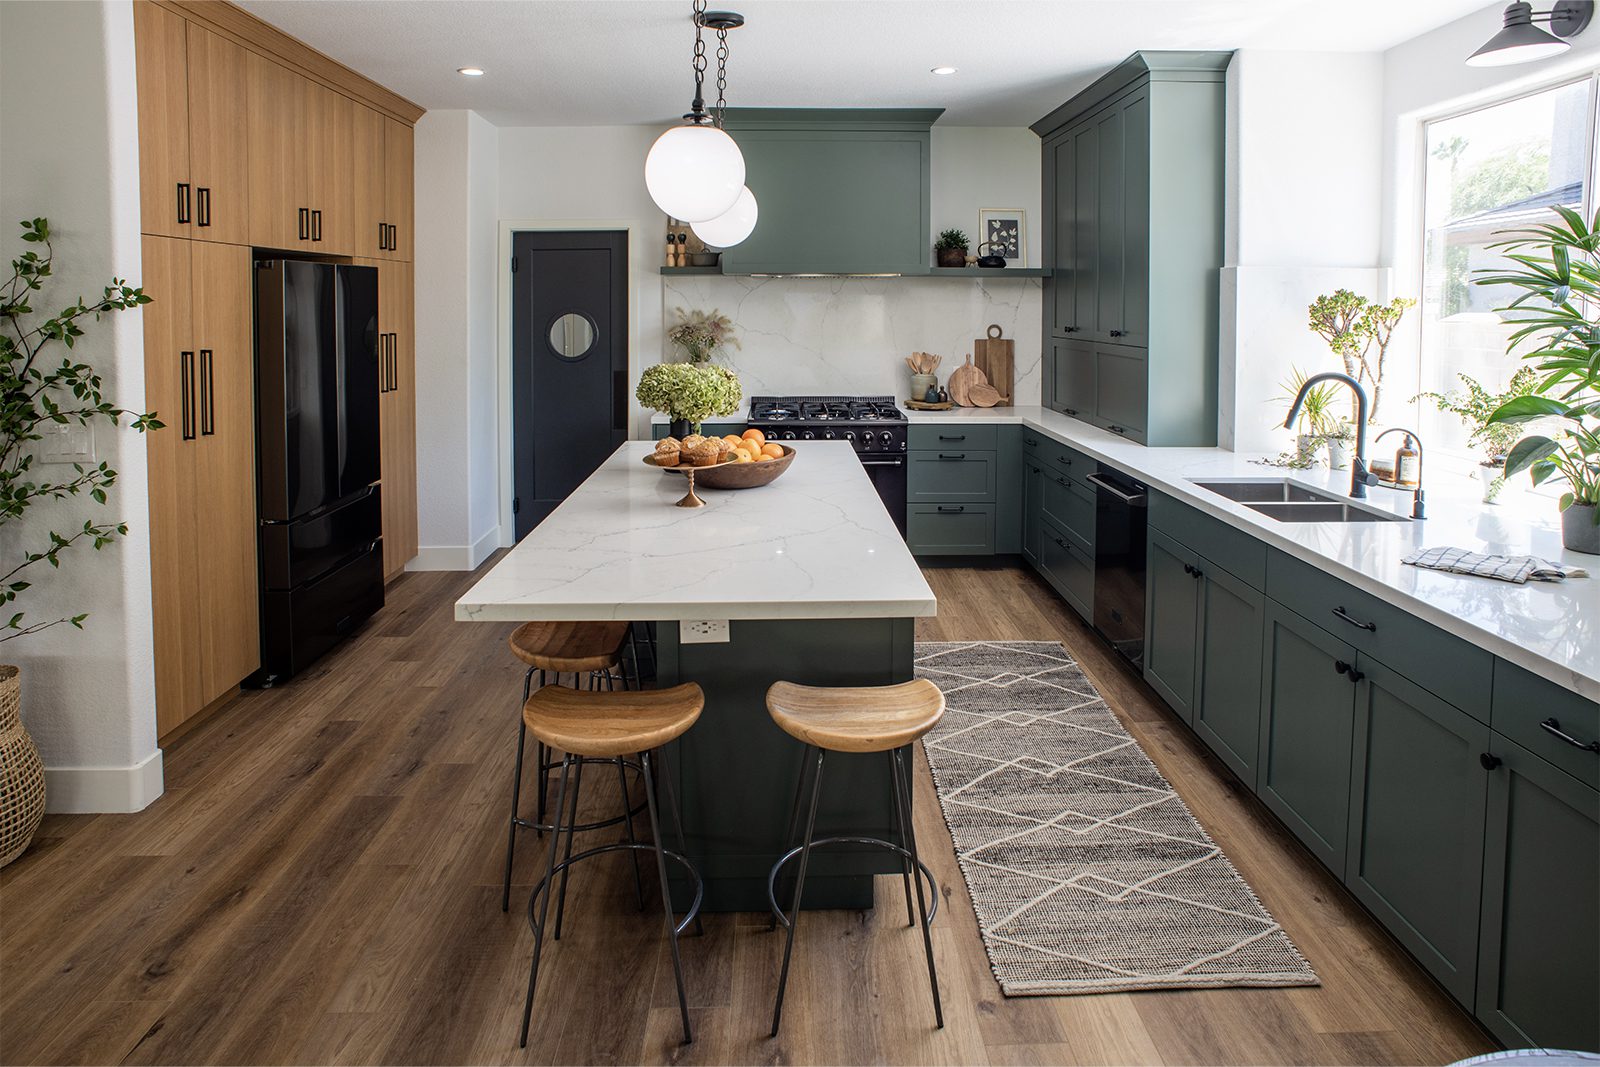 property brothers forever home kitchen reveal with wood interior and modern fixtures